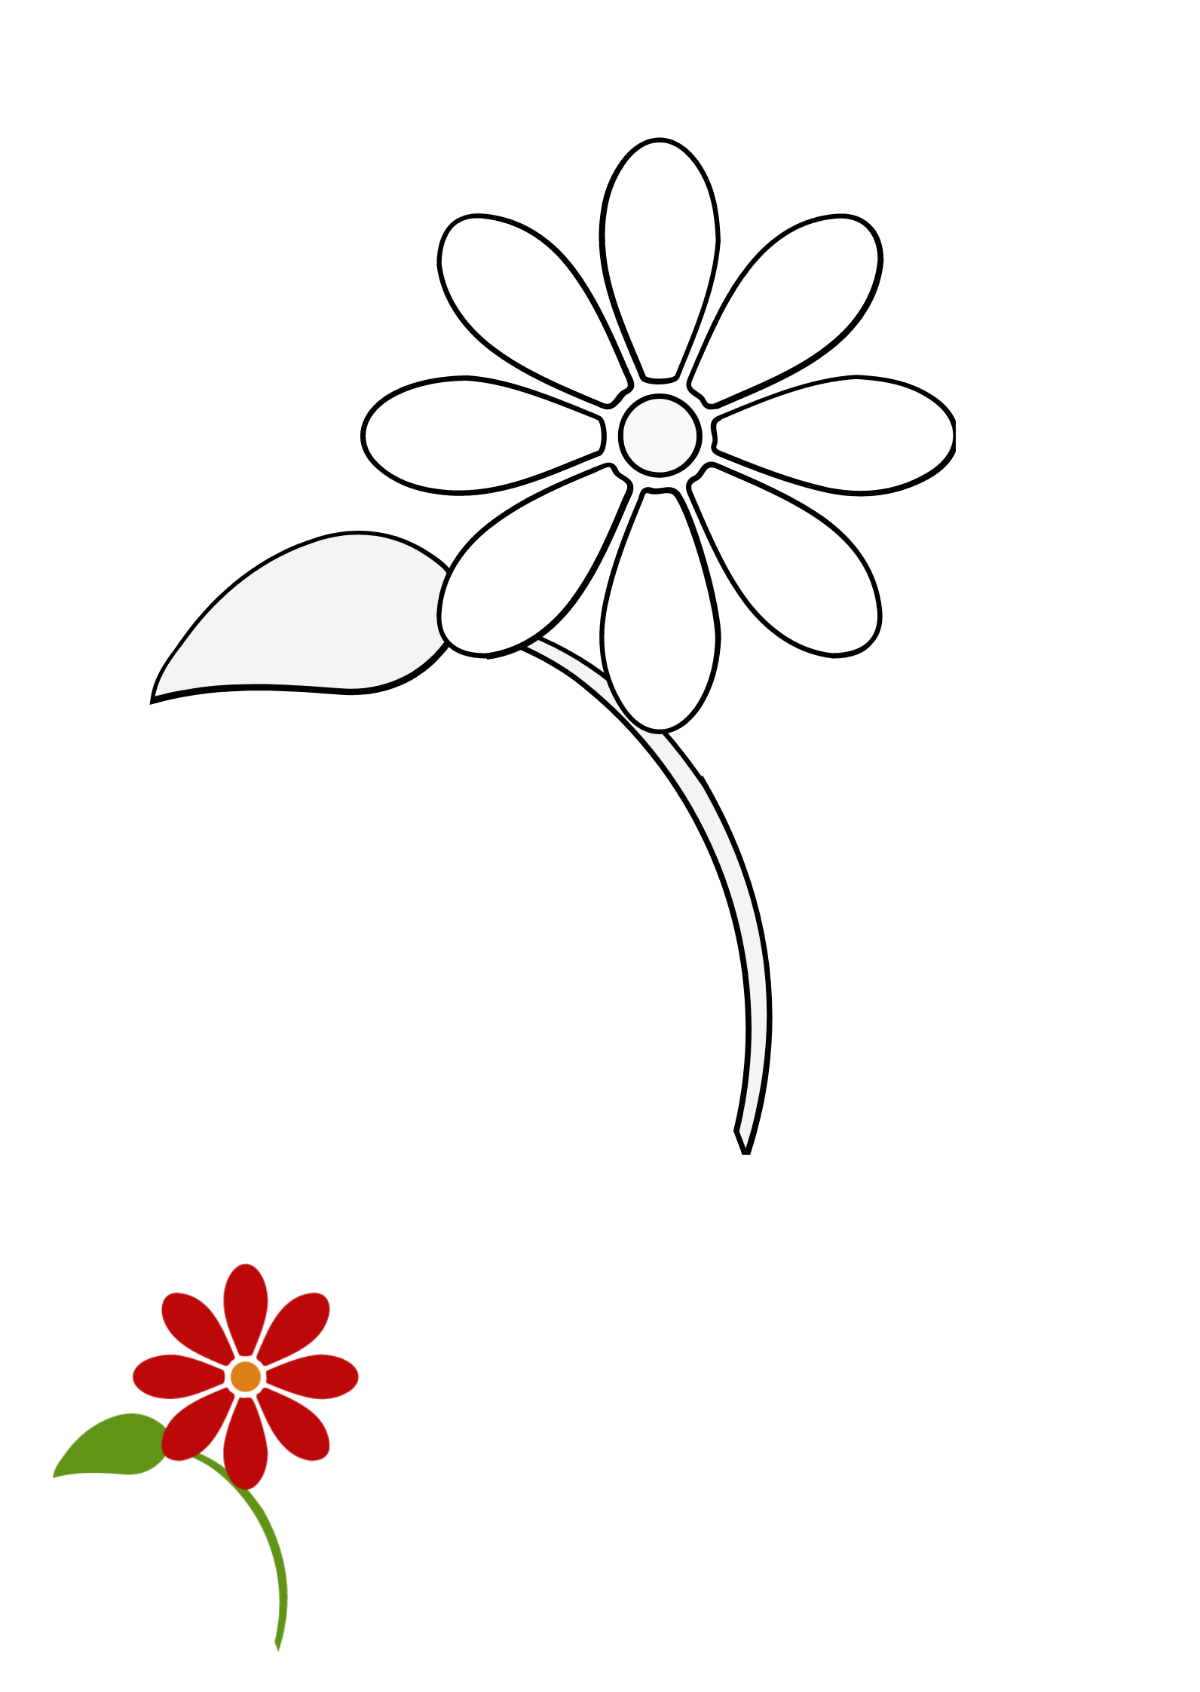 Single Flower Coloring Page Template